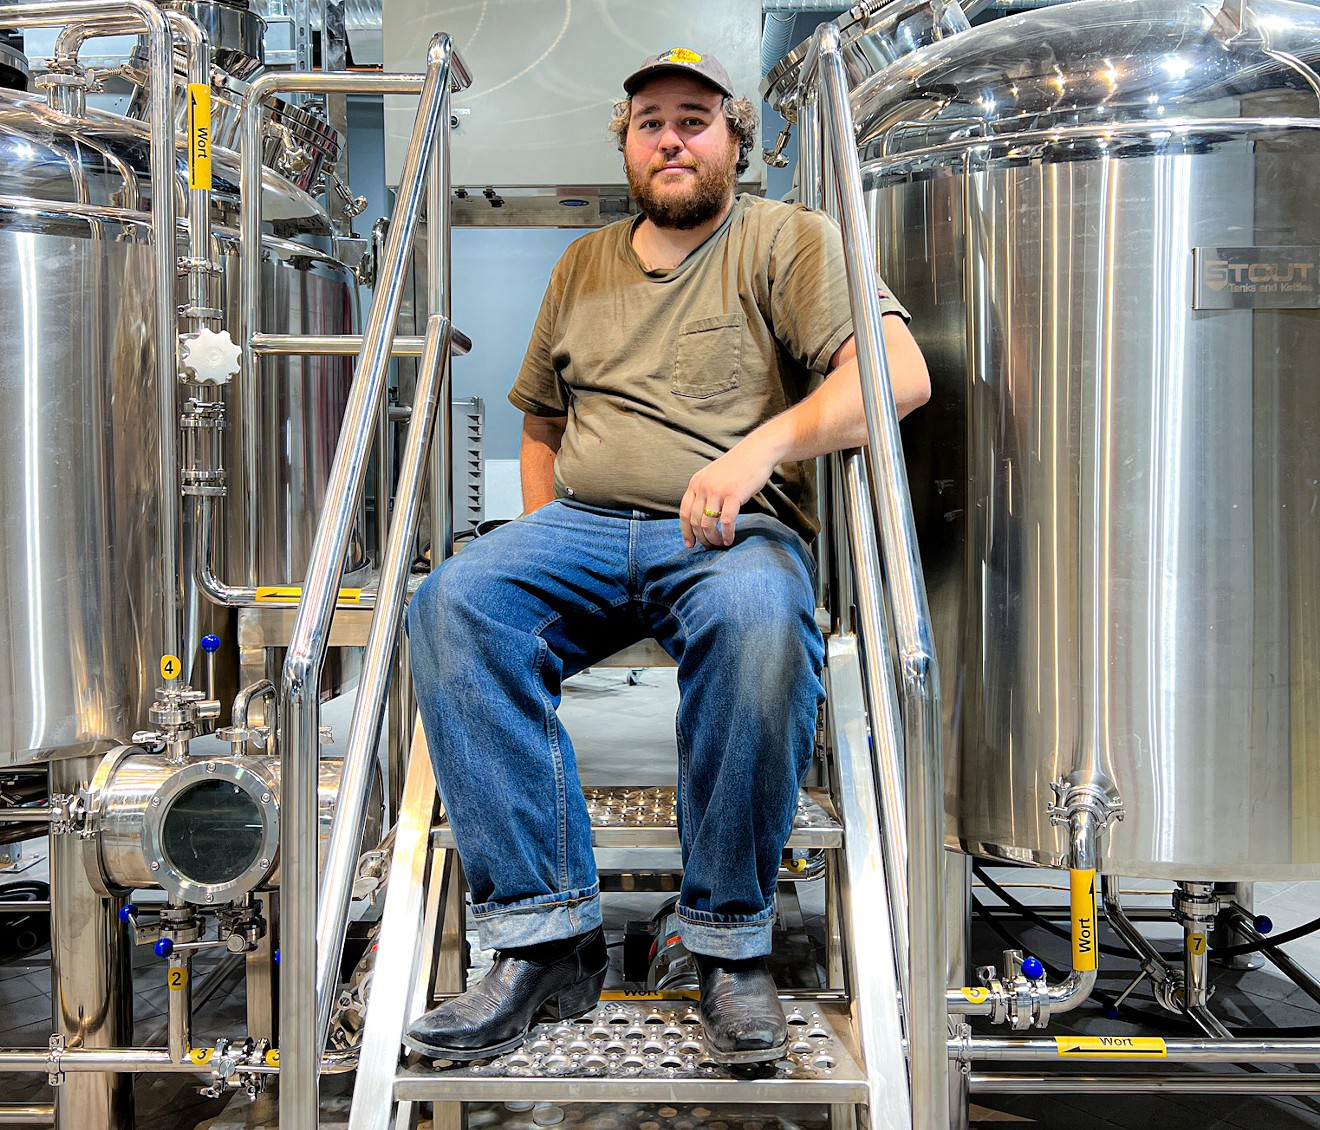 Will Walthereson plans to focus on brewing IPAs, sours and barrel-aged stouts – as well as hard seltzers – on the 10-barrel system at his new Tempe brewery, Catalyst Crafted Ales.